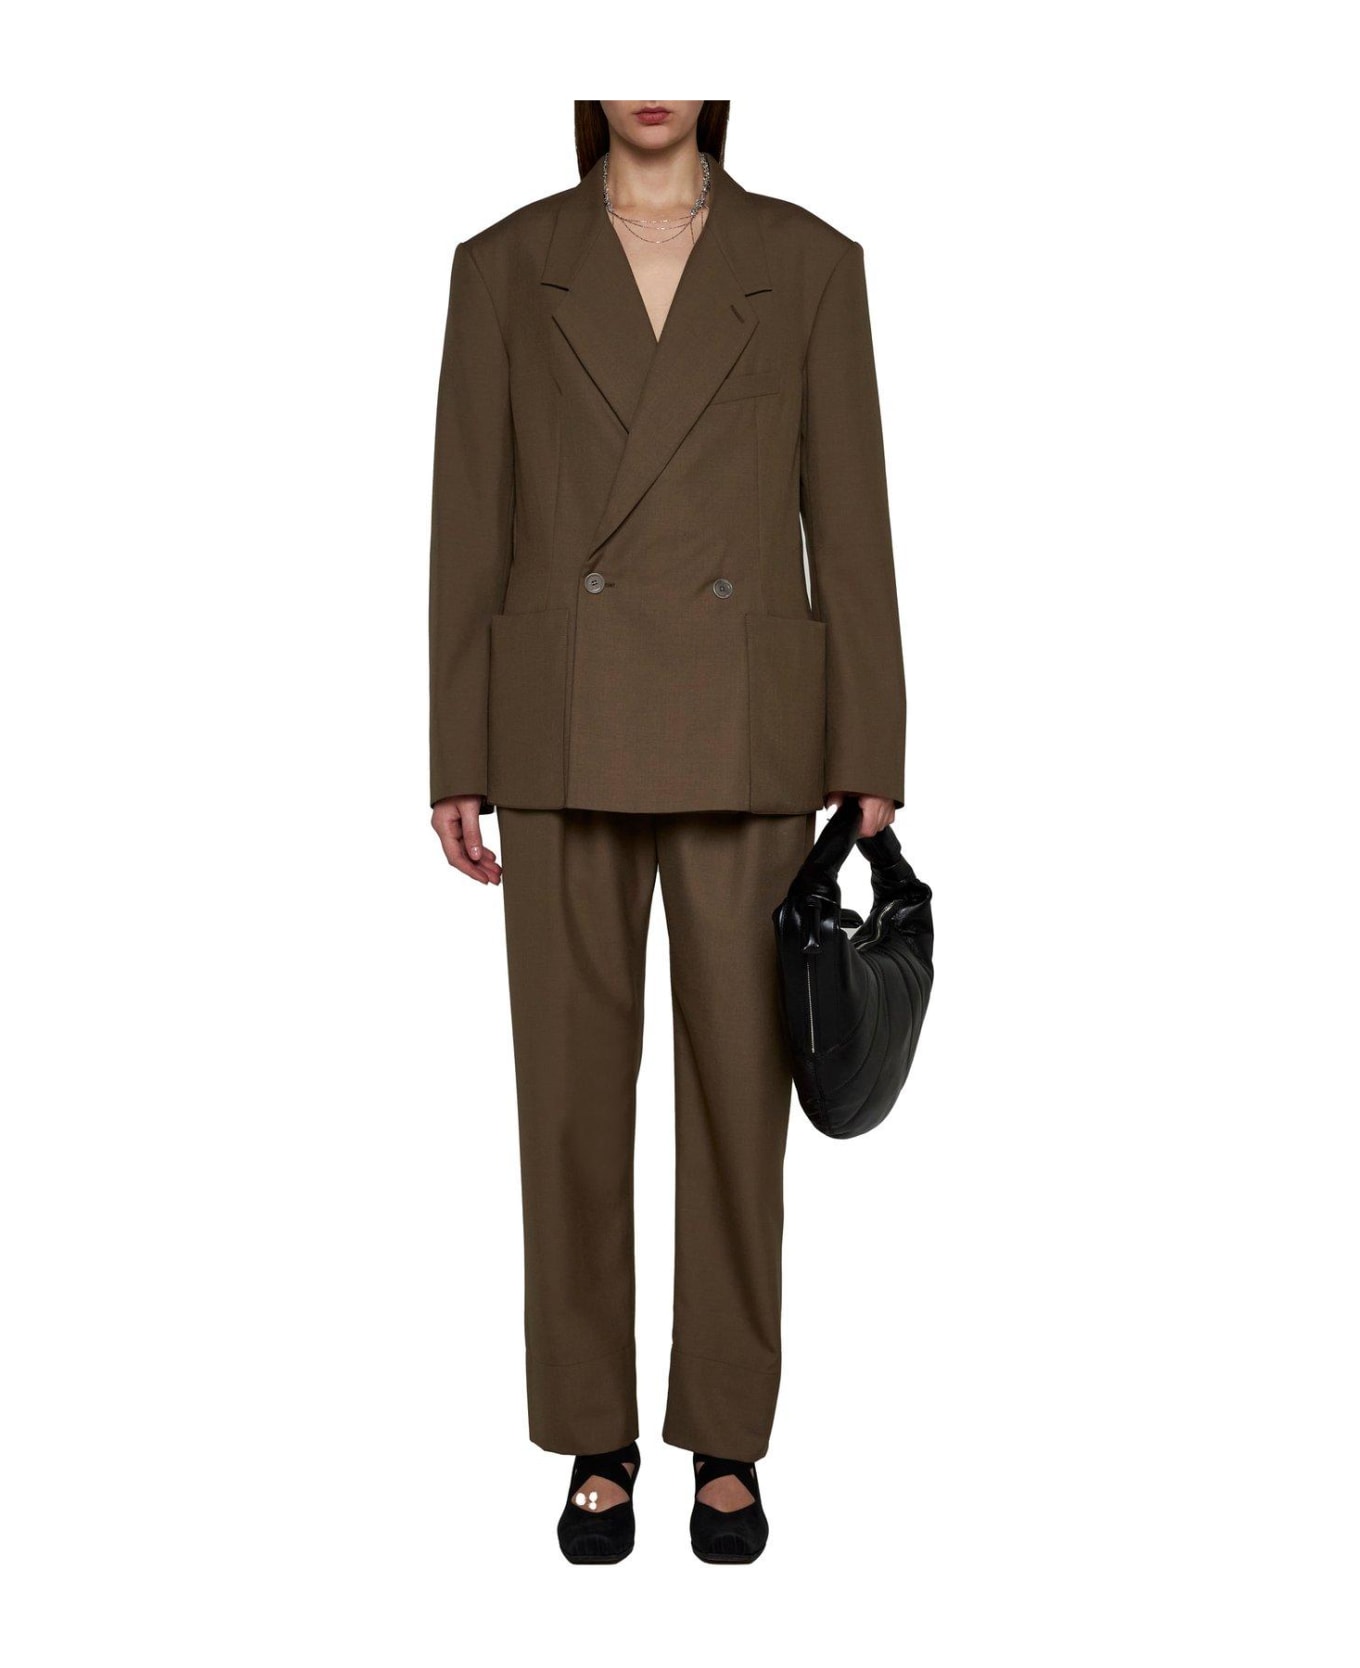 Lemaire Straight-hem Double-breasted Blazer - NEUTRALS